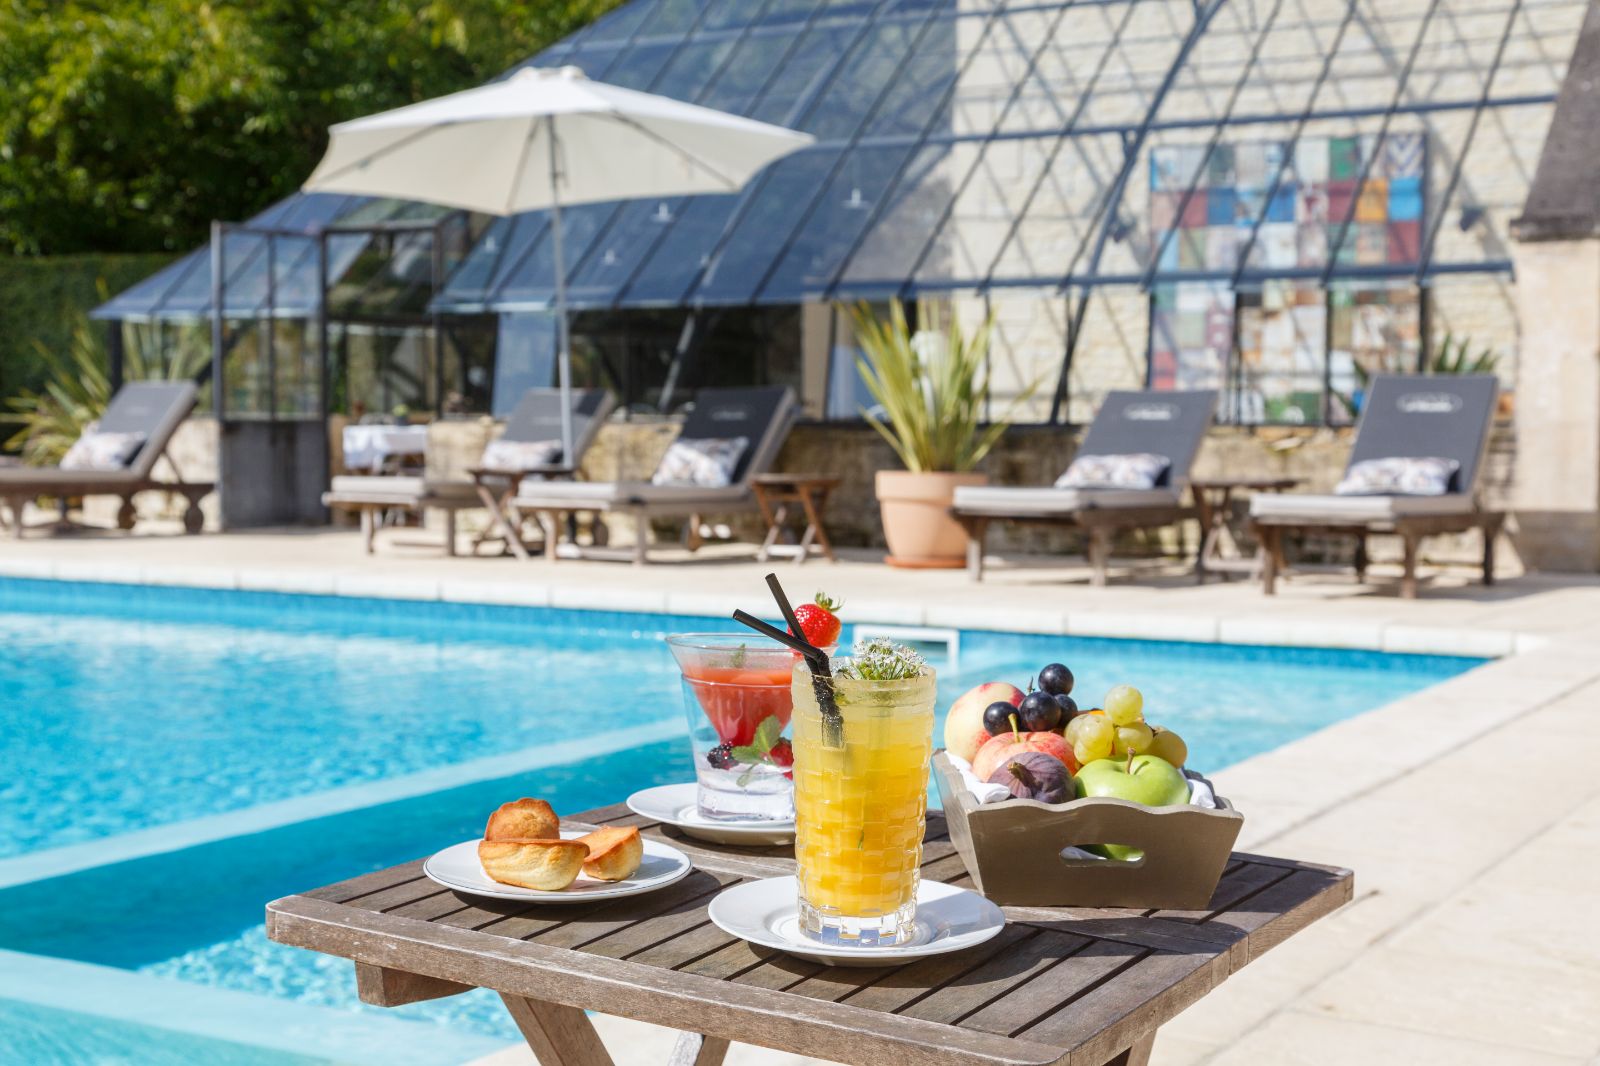 Food at the poolside at Chateau La Cheneviere in the Normandy region of France